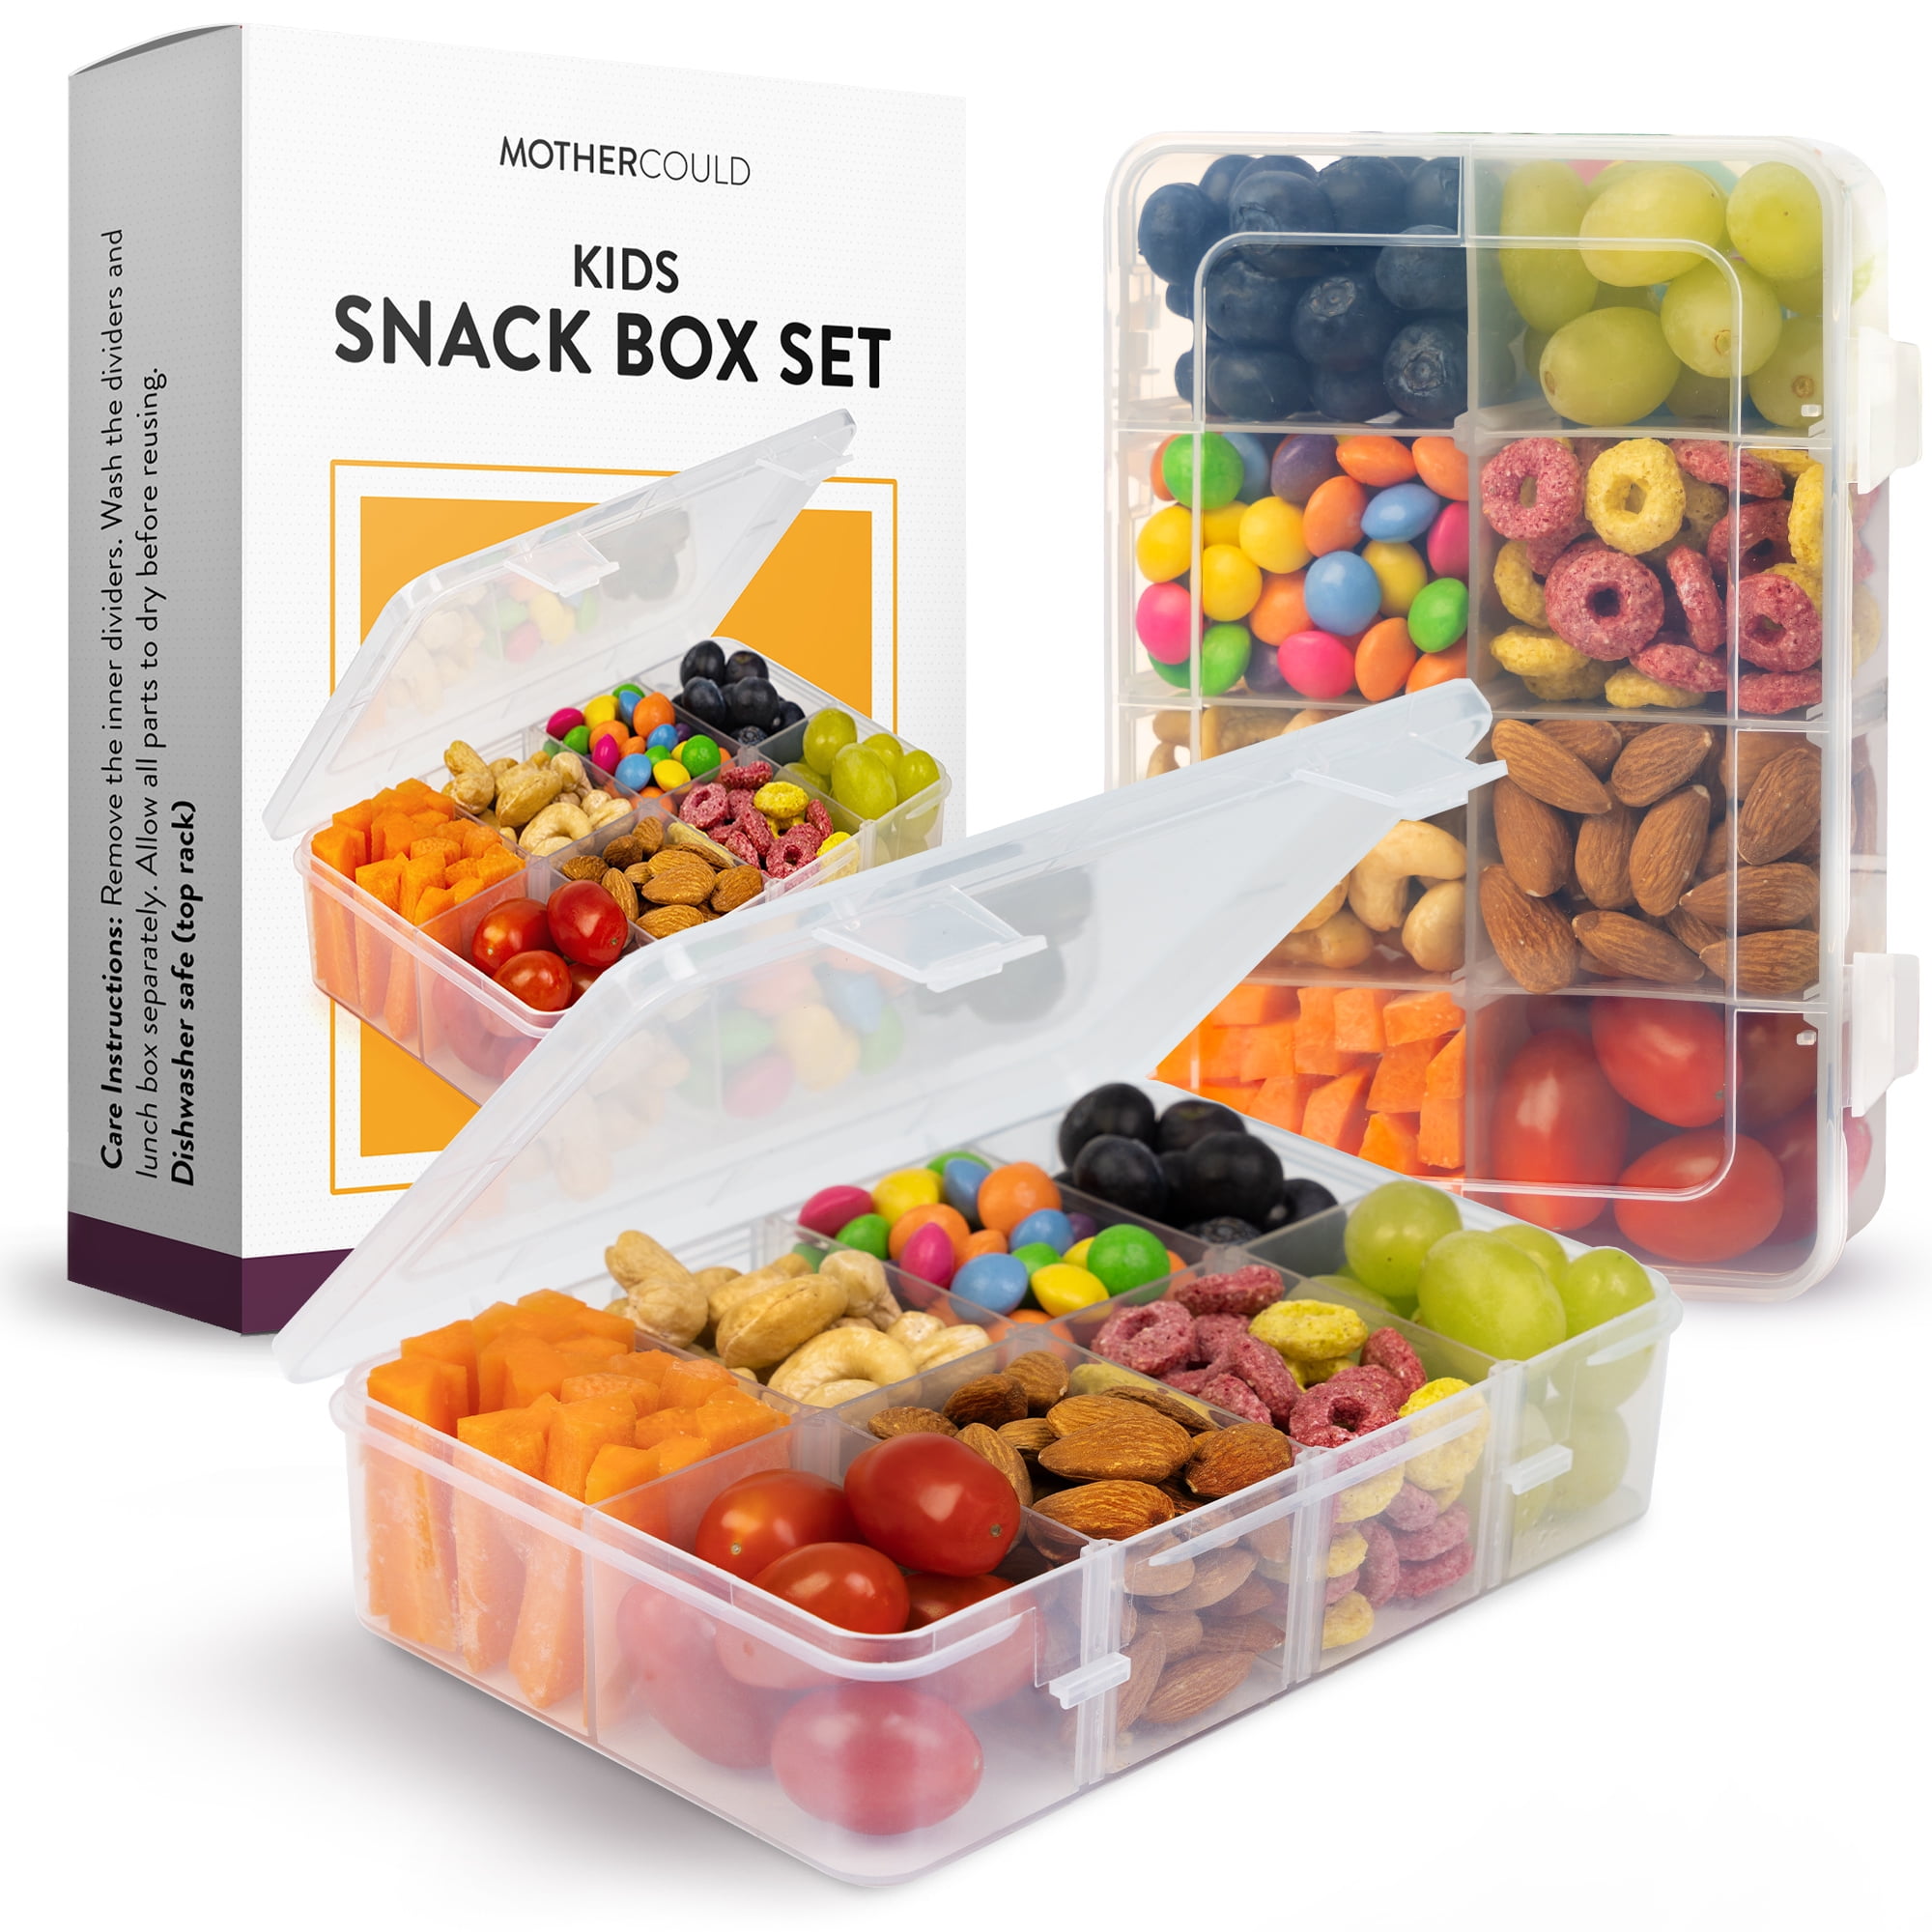 Mothercould Kids Snack Box Set - 8 Compartments, Reusable Snack